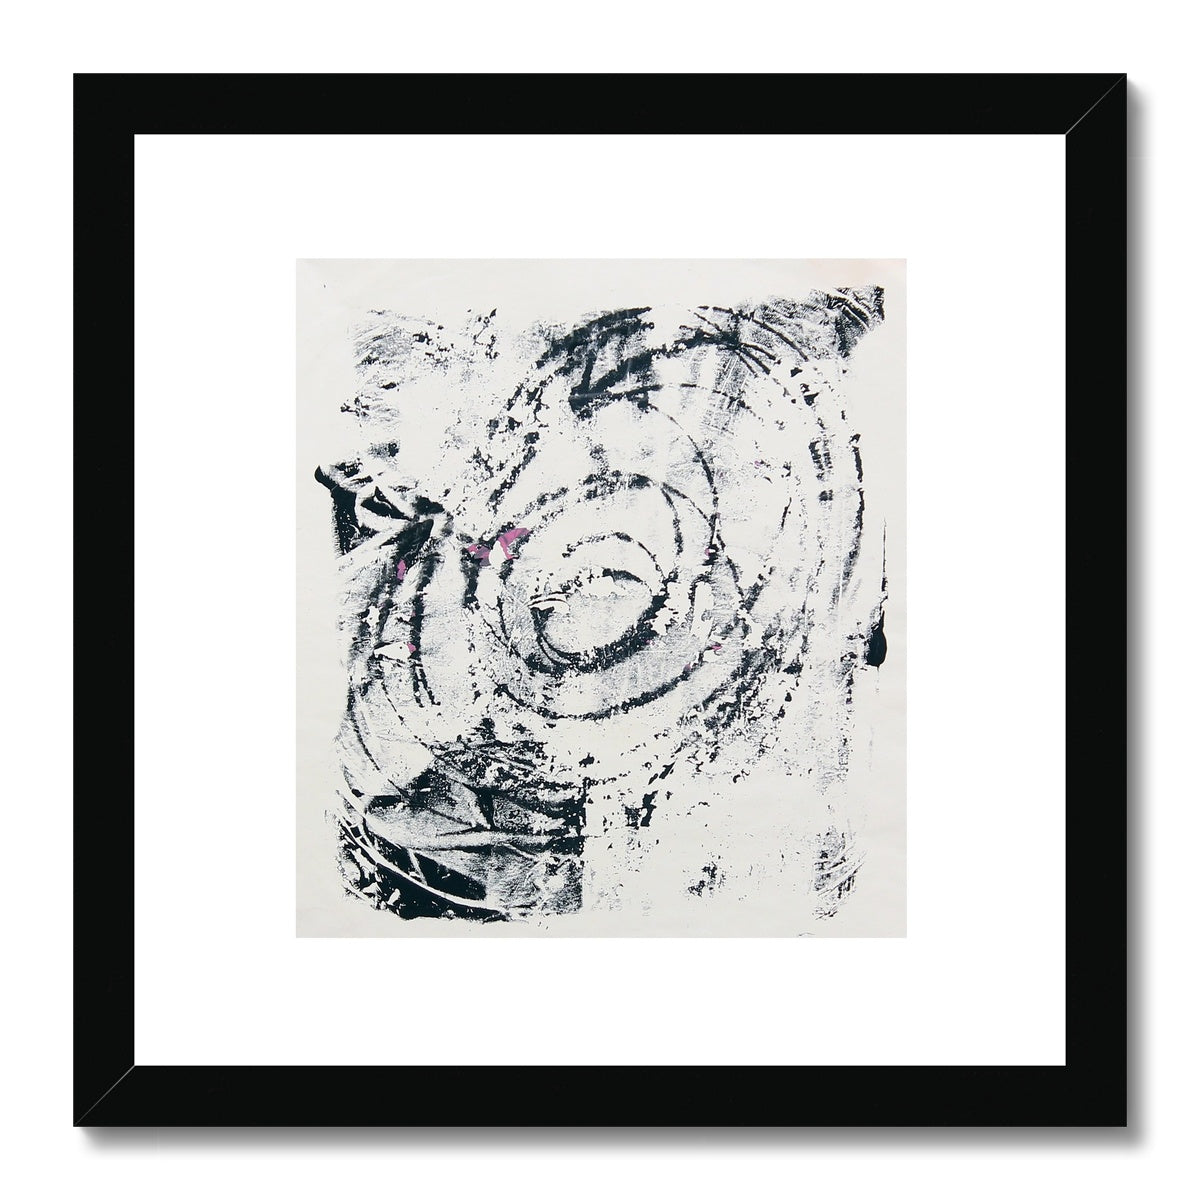 Inhale and exhale 8, Framed & Mounted Print